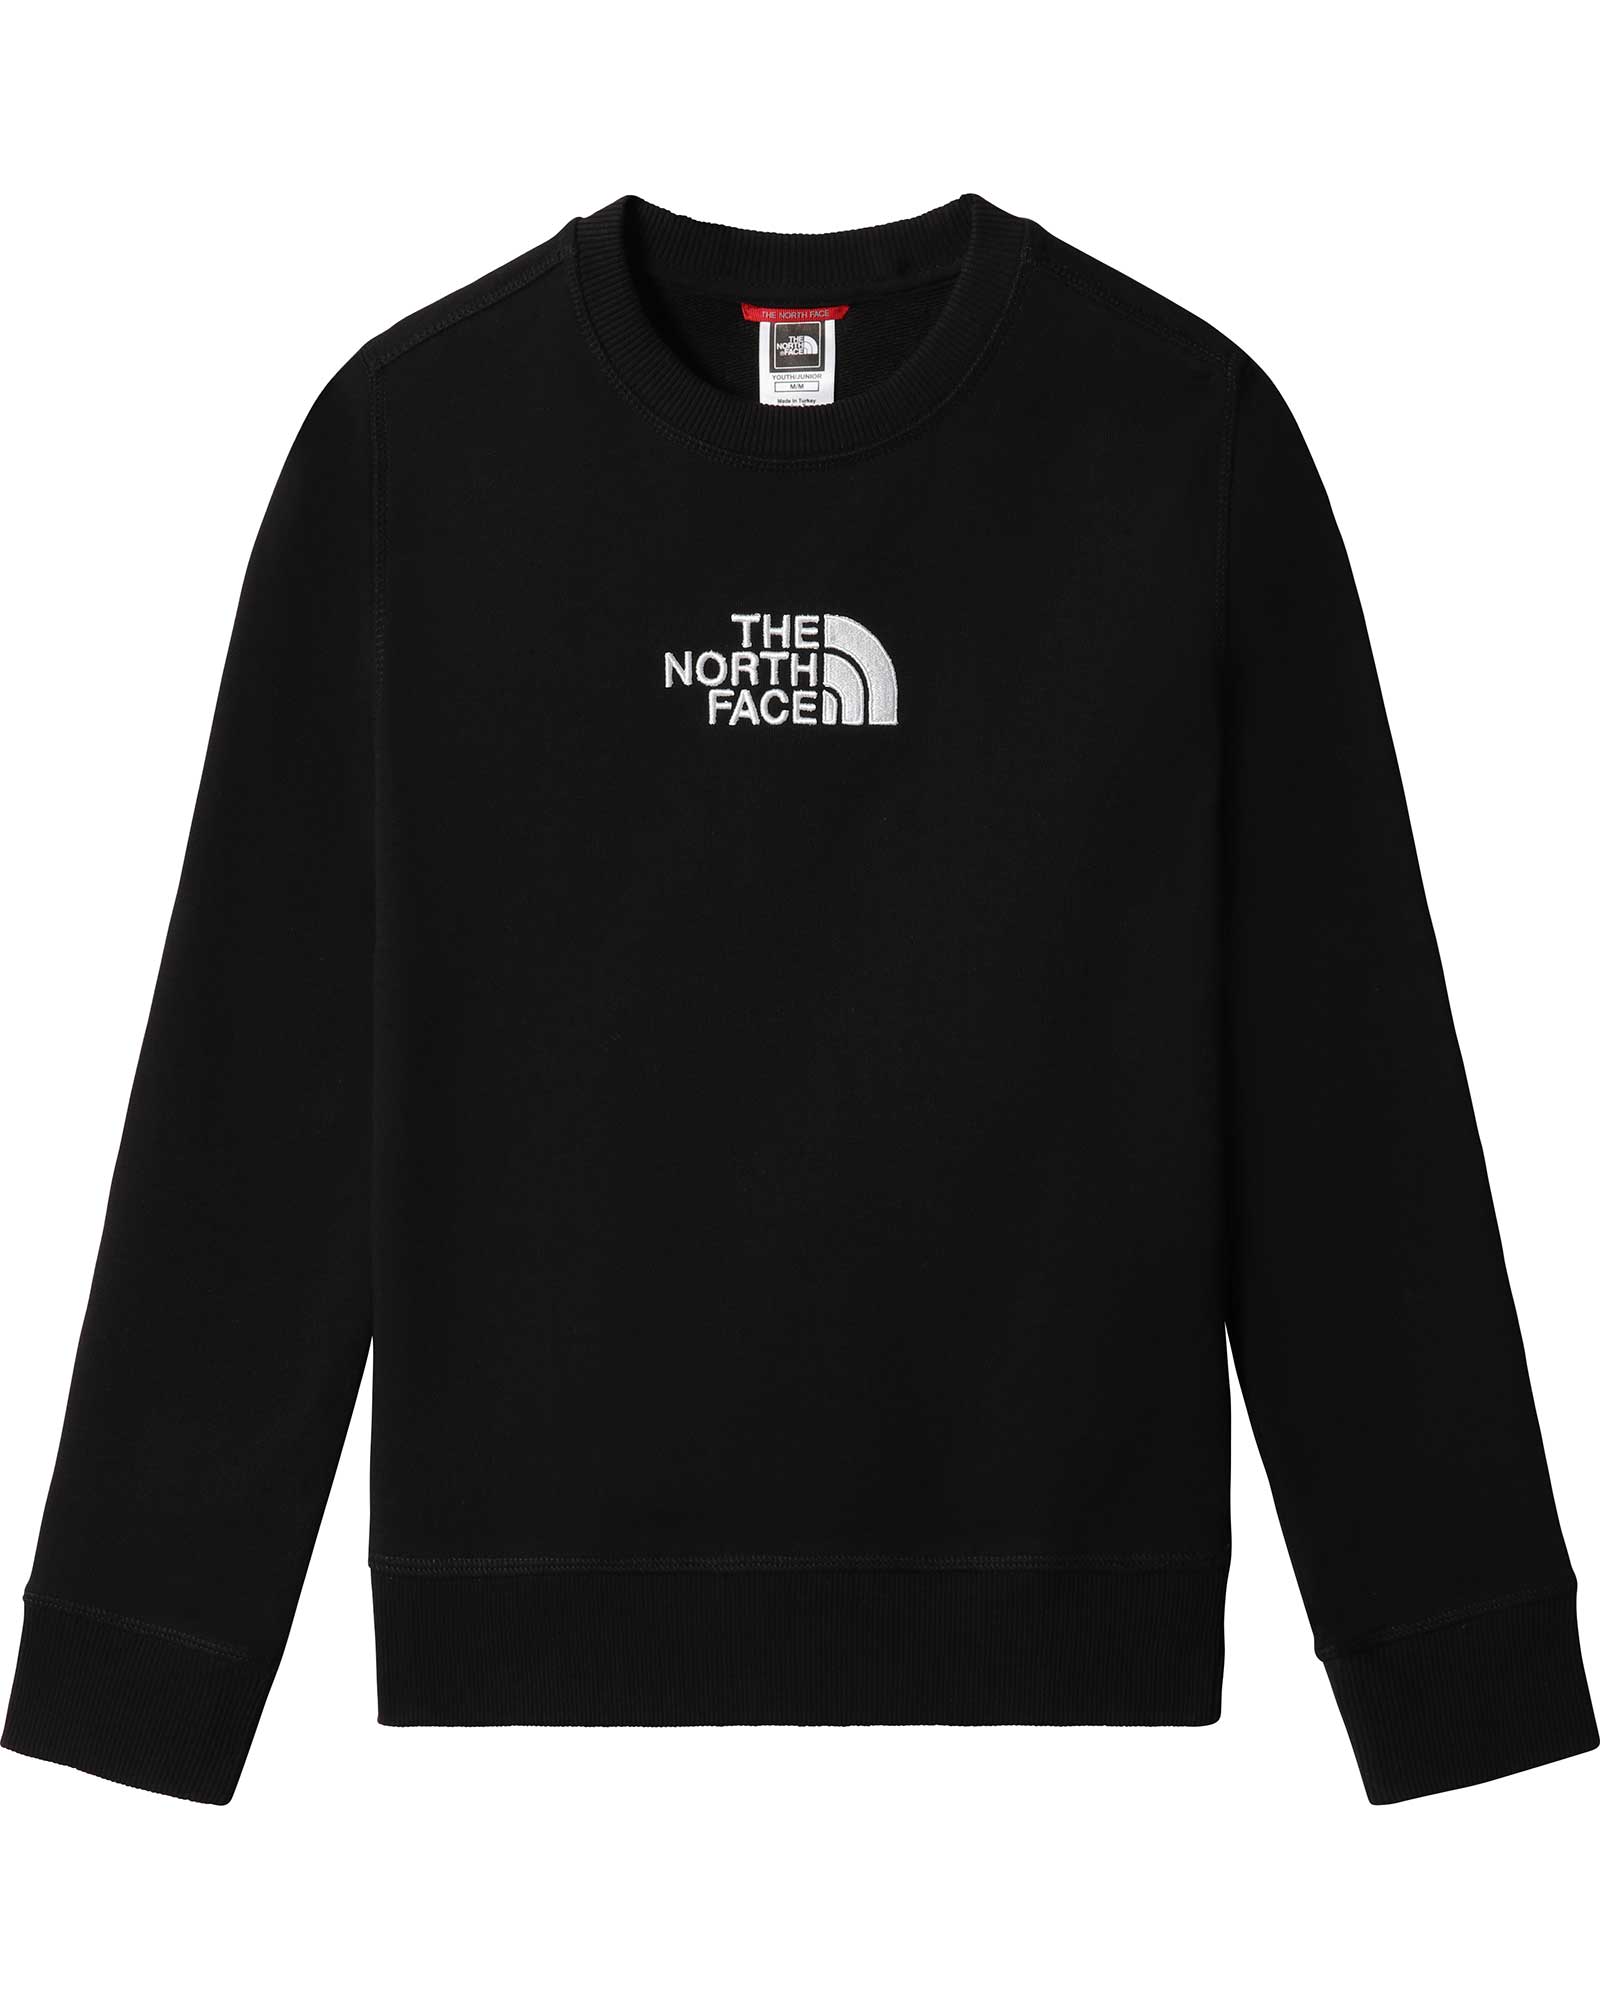 The North Face Youth Youth Drew Peak Kids Light Crew